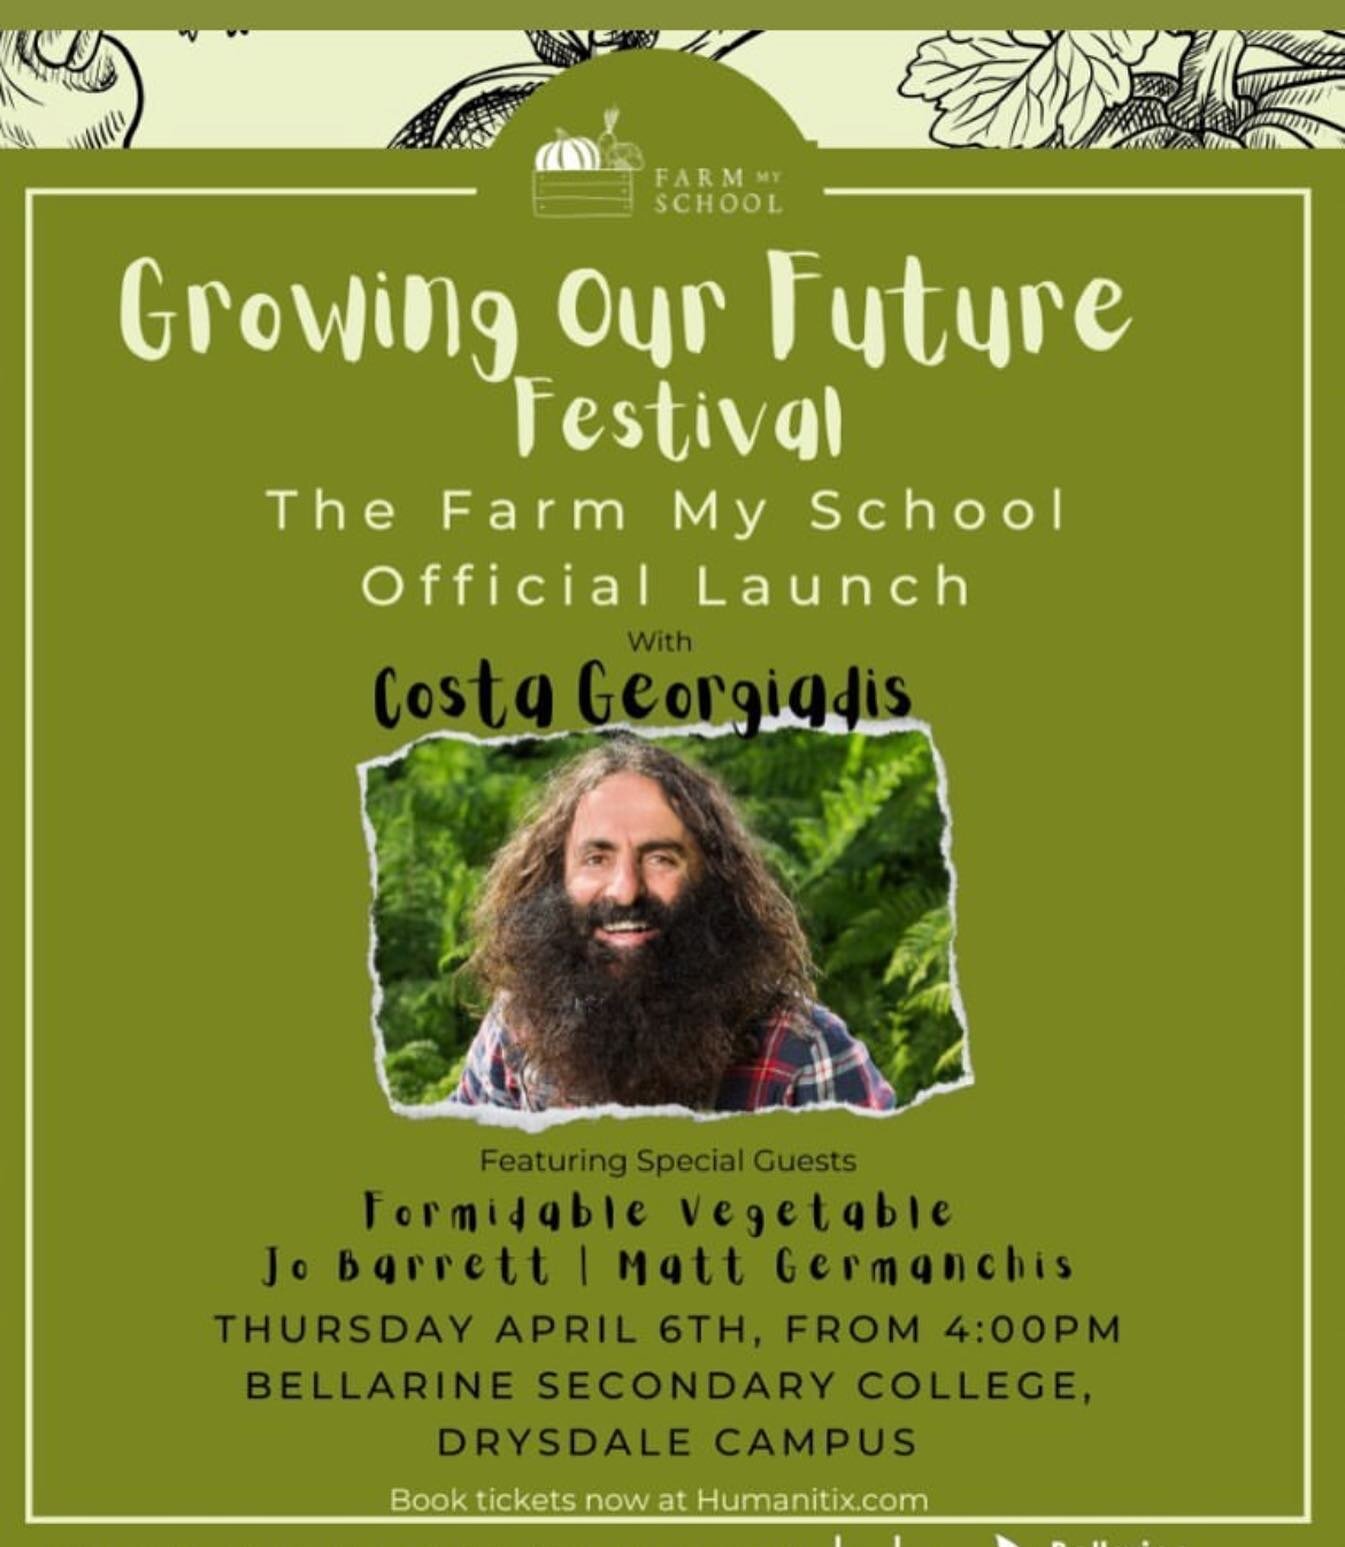 Don&rsquo;t miss out on this speccy event at @farm.my.school ! It&rsquo;s their official launch party with some pretty speccy guests including the one and only @costasworld , with @jobarrett and @mattgermanchis cooking up some special treats for y&rs